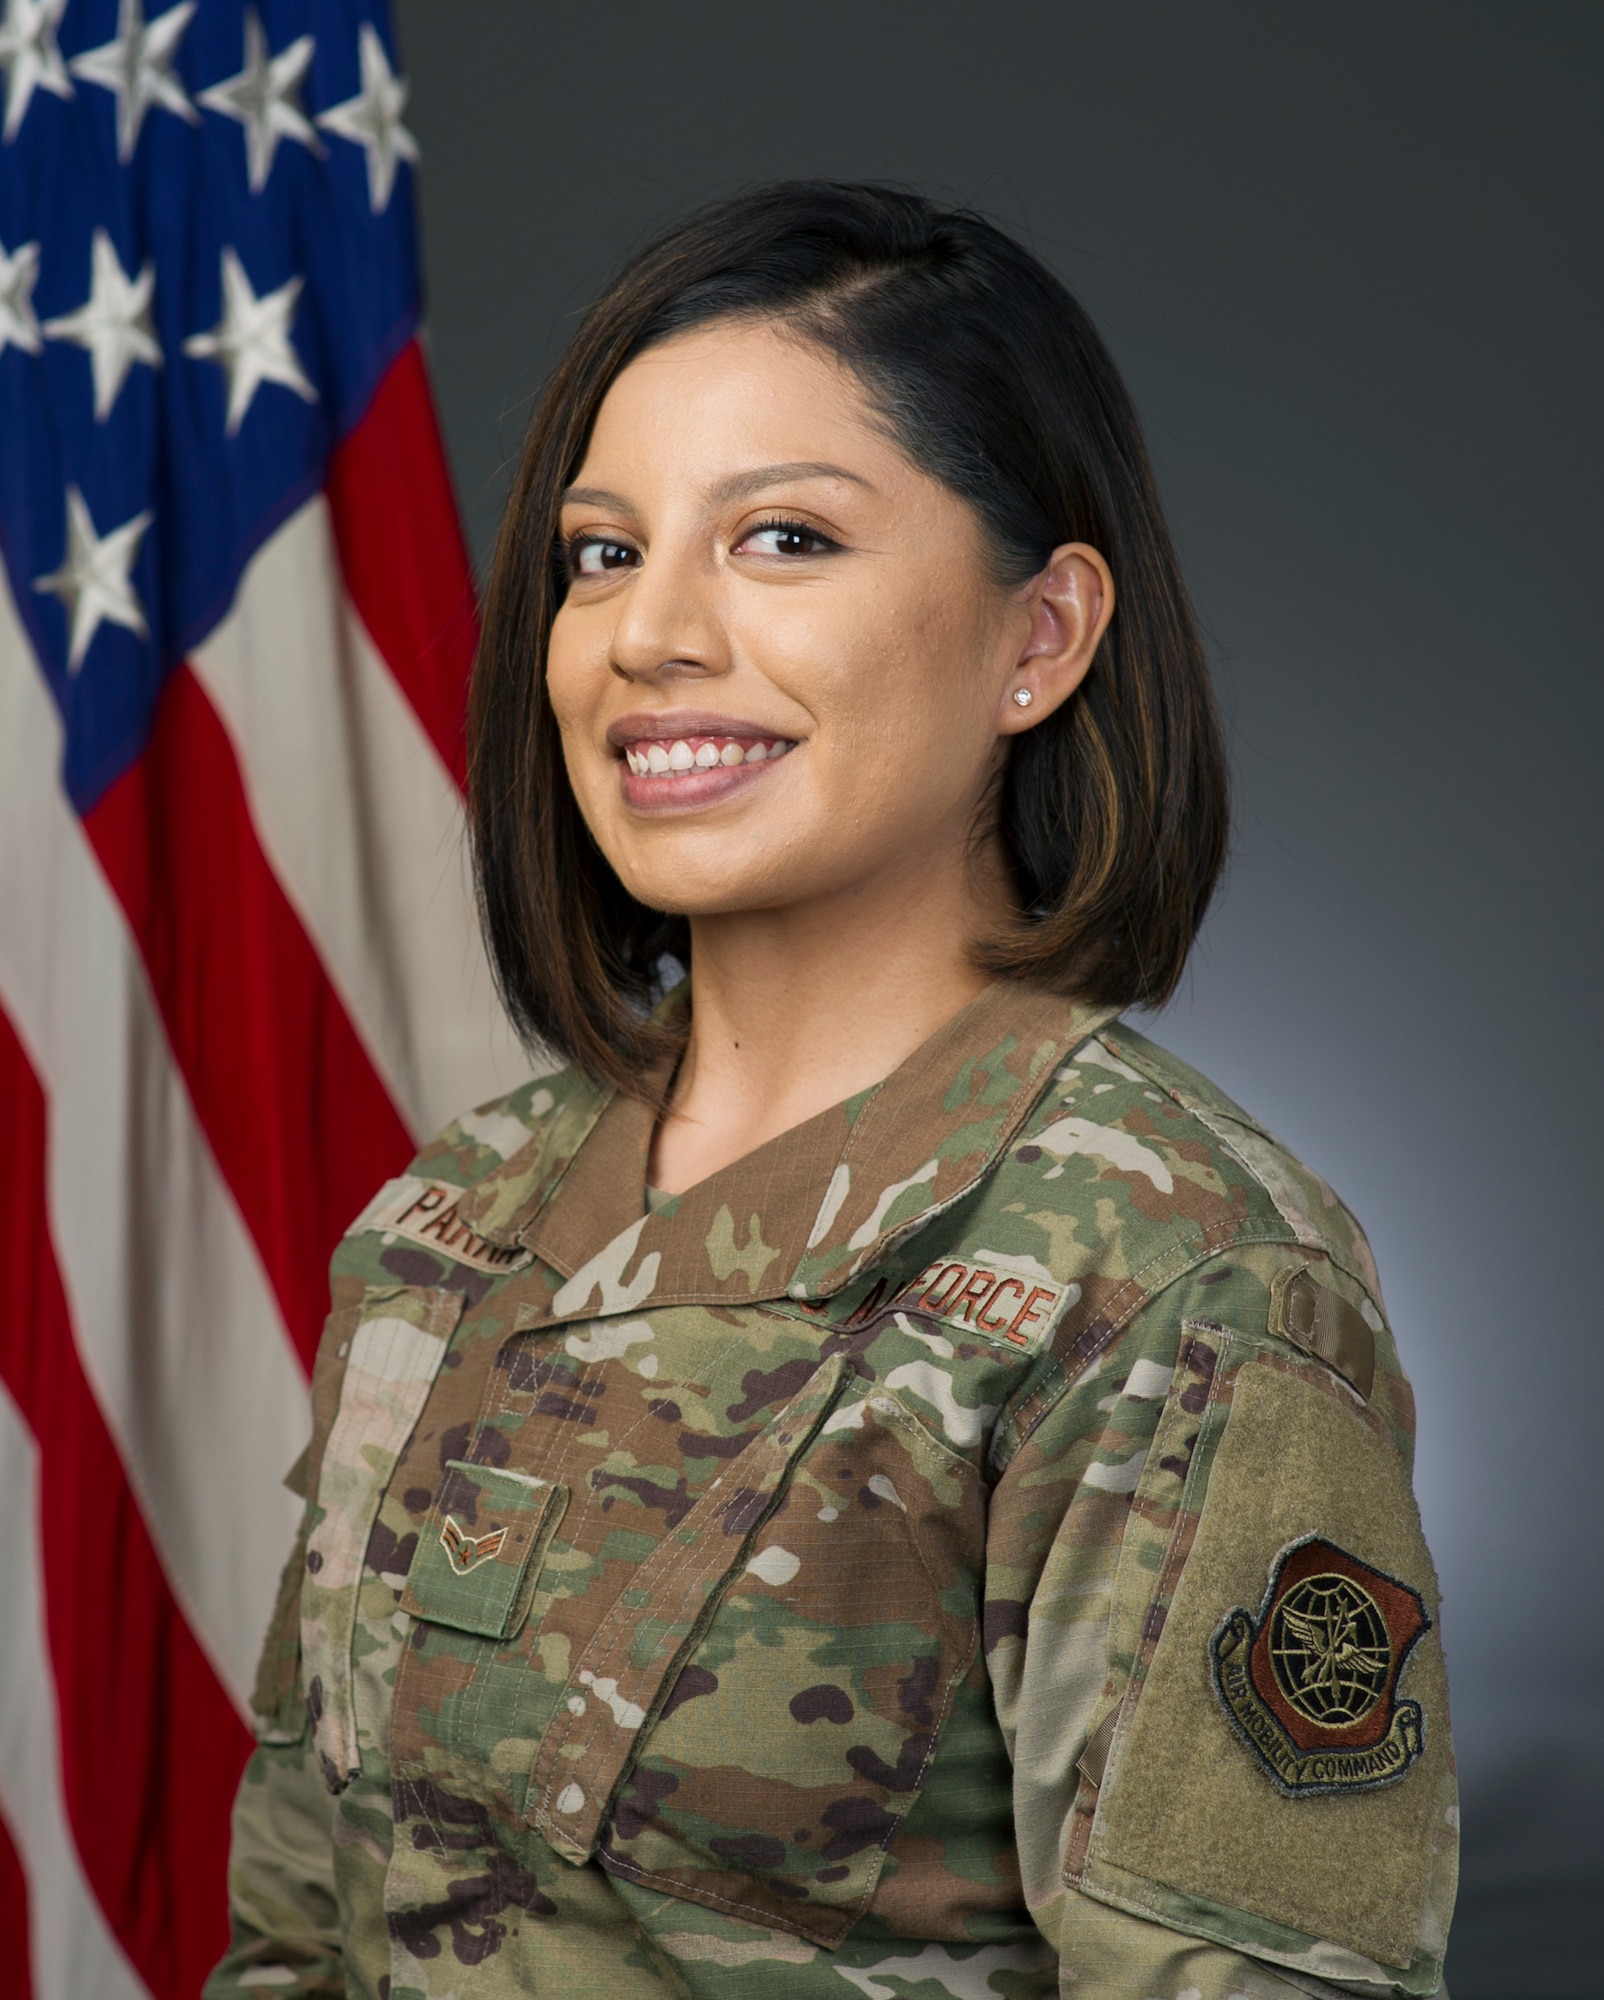 U.S. Airman 1st Class Karla Parra, 60th Air Mobility Wing broadcast journalist, poses for a photo